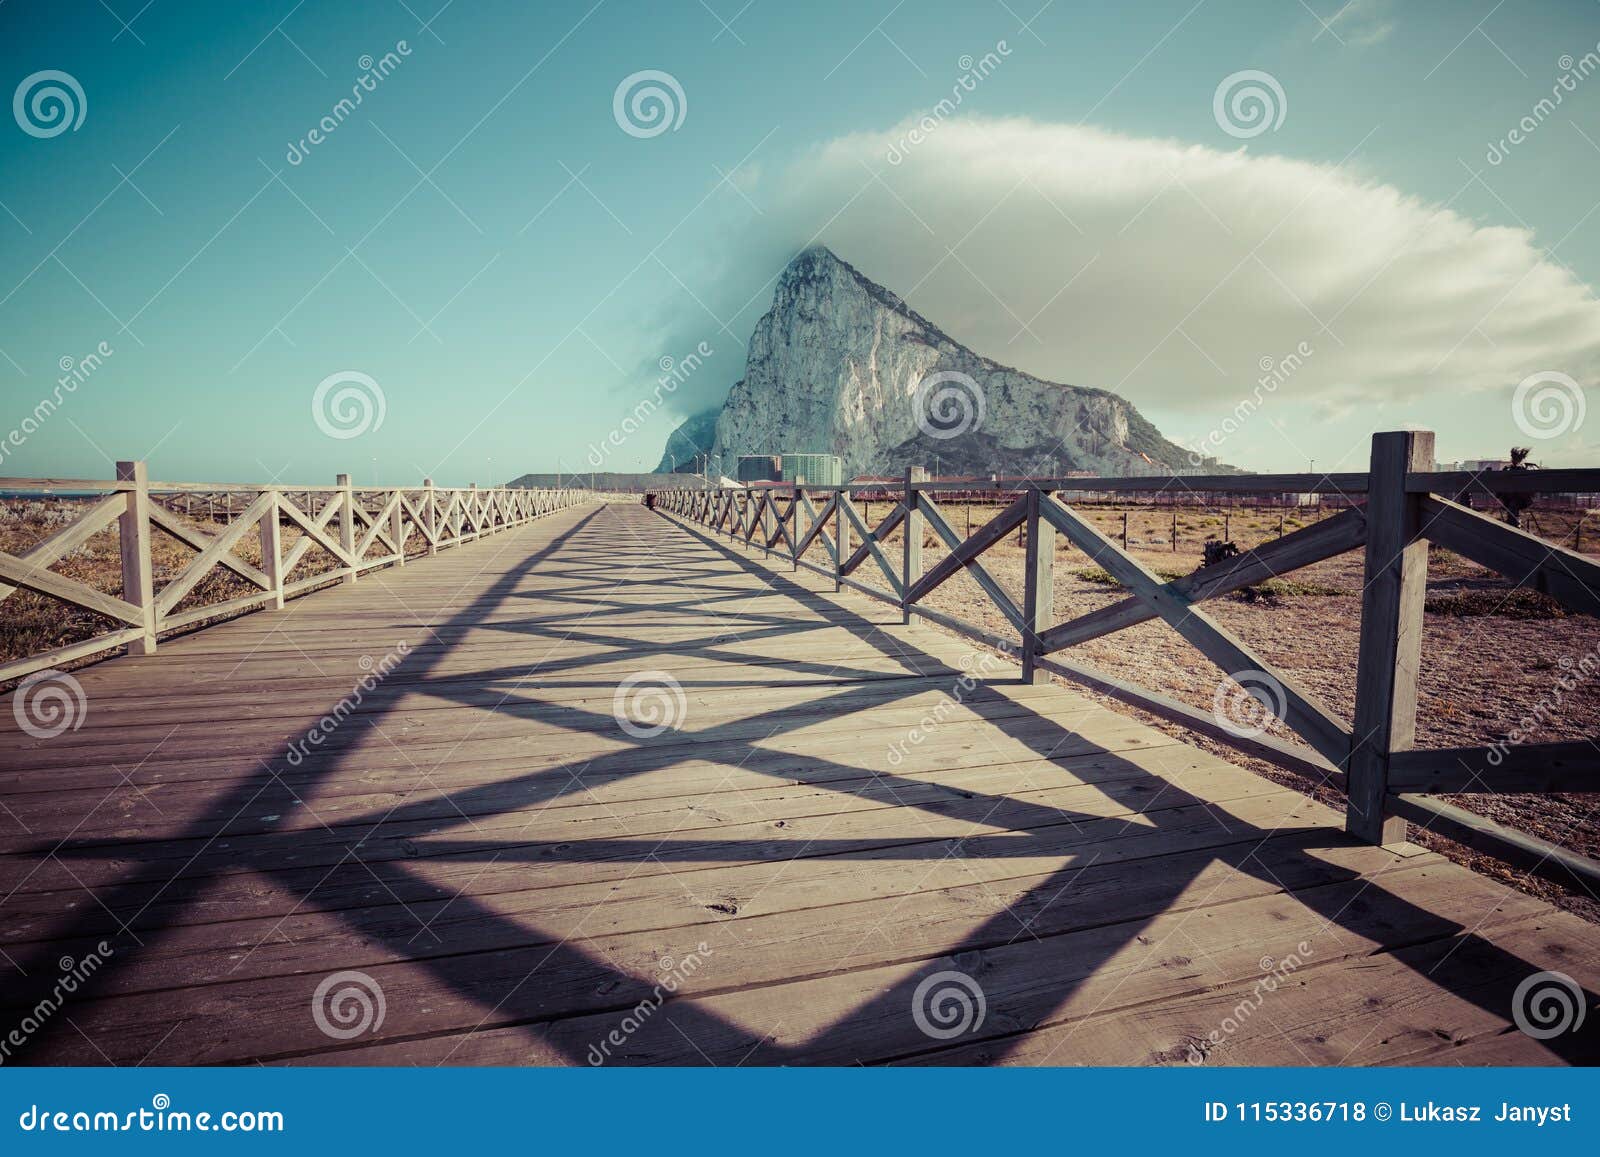 the rock of gibraltar from the beach of la linea, spain